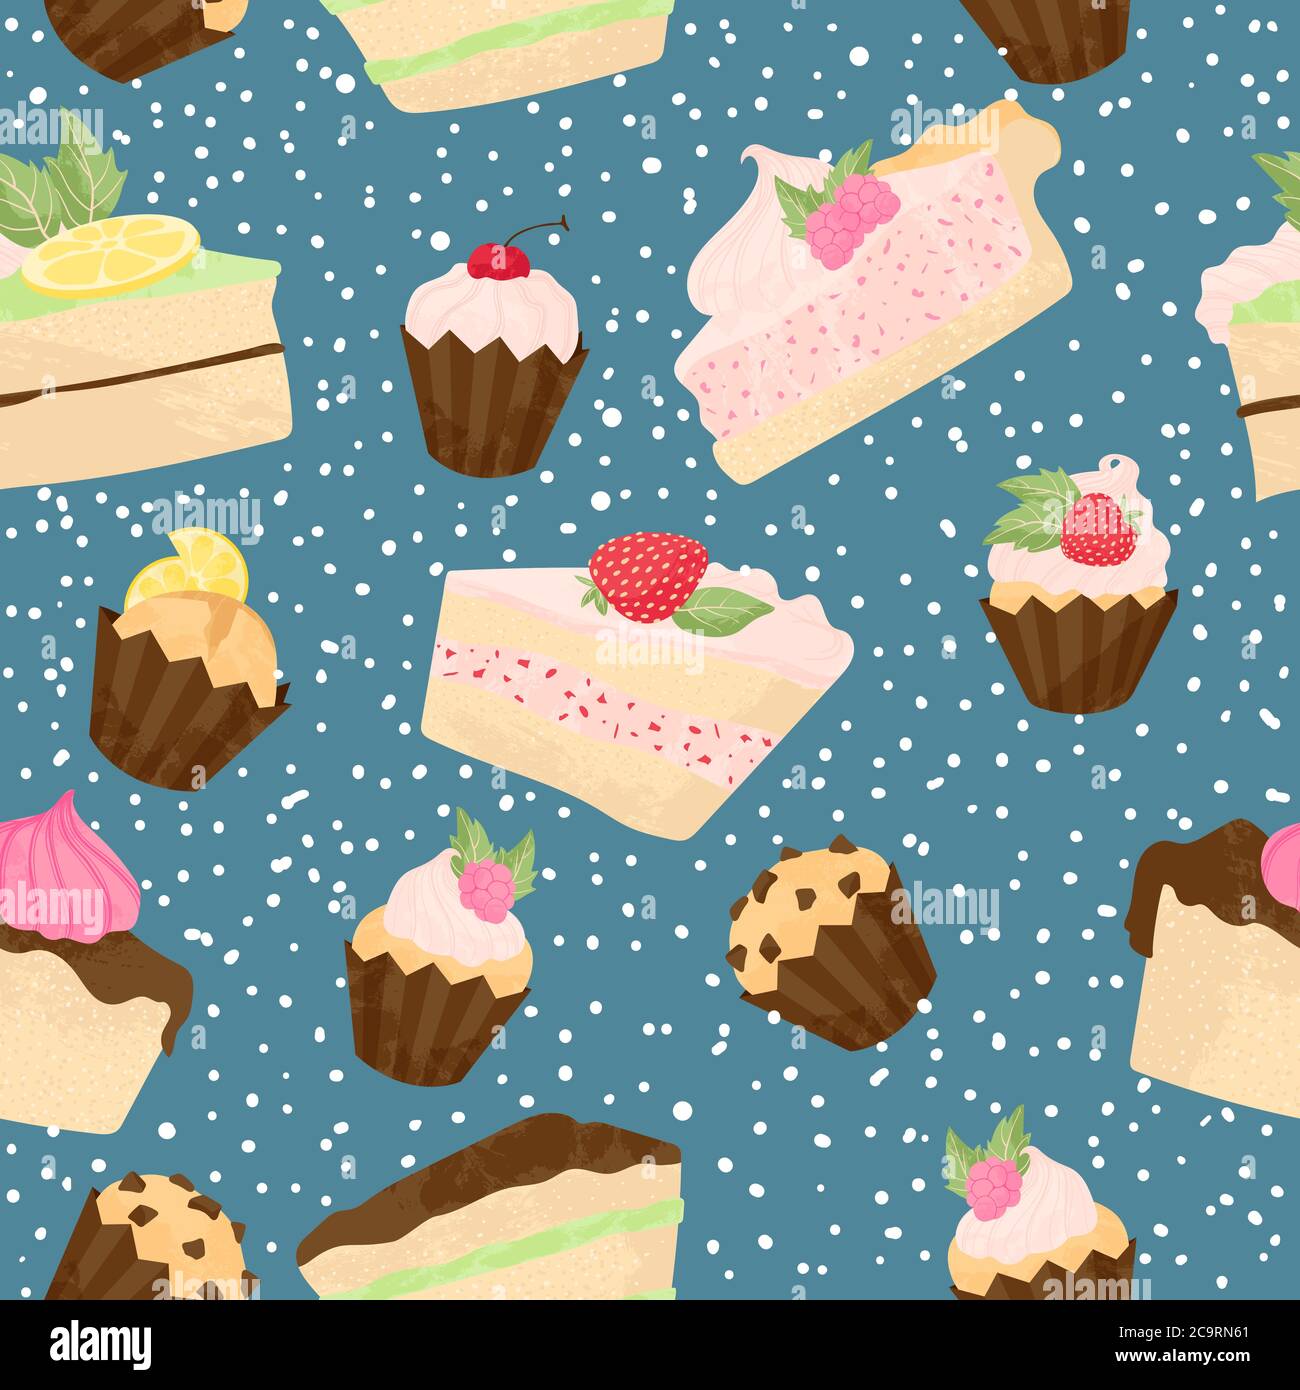 Vector pastry seamless pattern with cakes, profiterole, muffins, cupcakes and eclair with chocolate, fruits and berries. Hand drawn sweet bakery produ Stock Vector